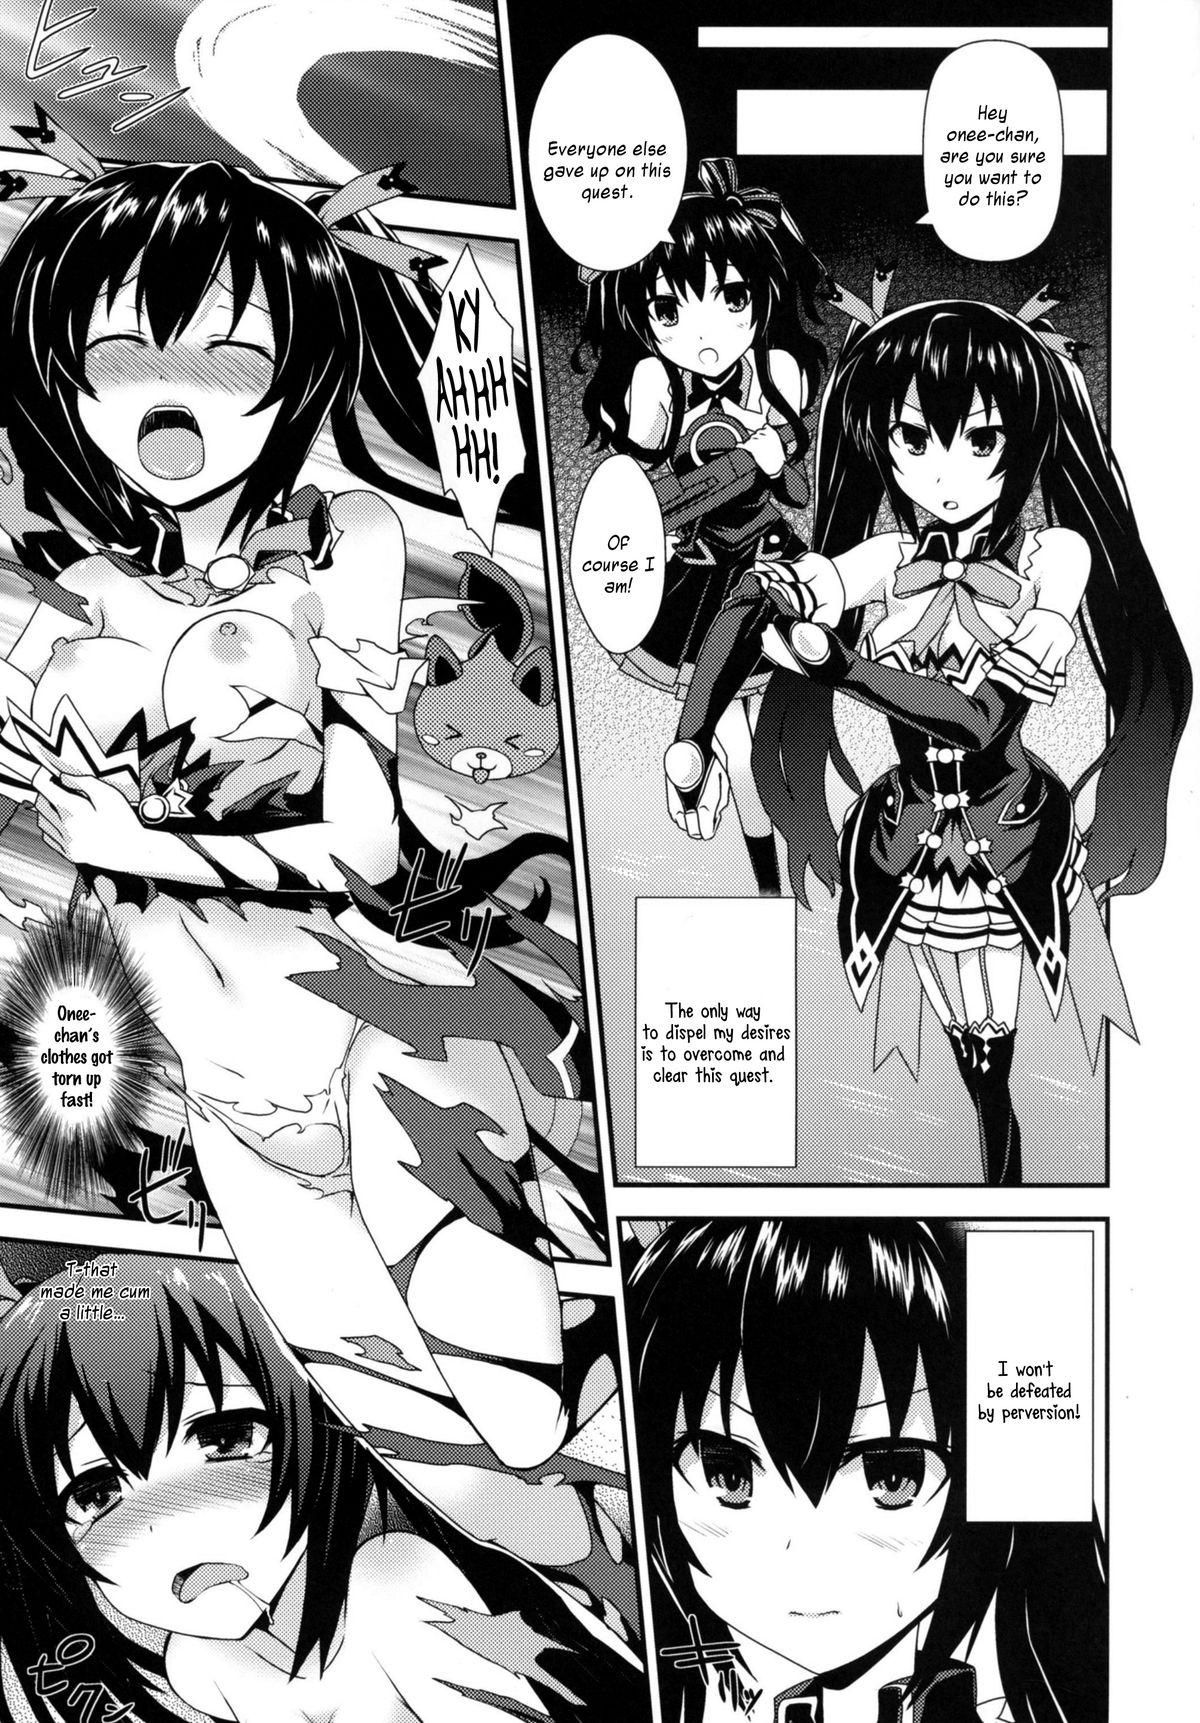 Mouth Inyoku no Sustain - Sustain of Lust - Hyperdimension neptunia Taiwan - Page 6